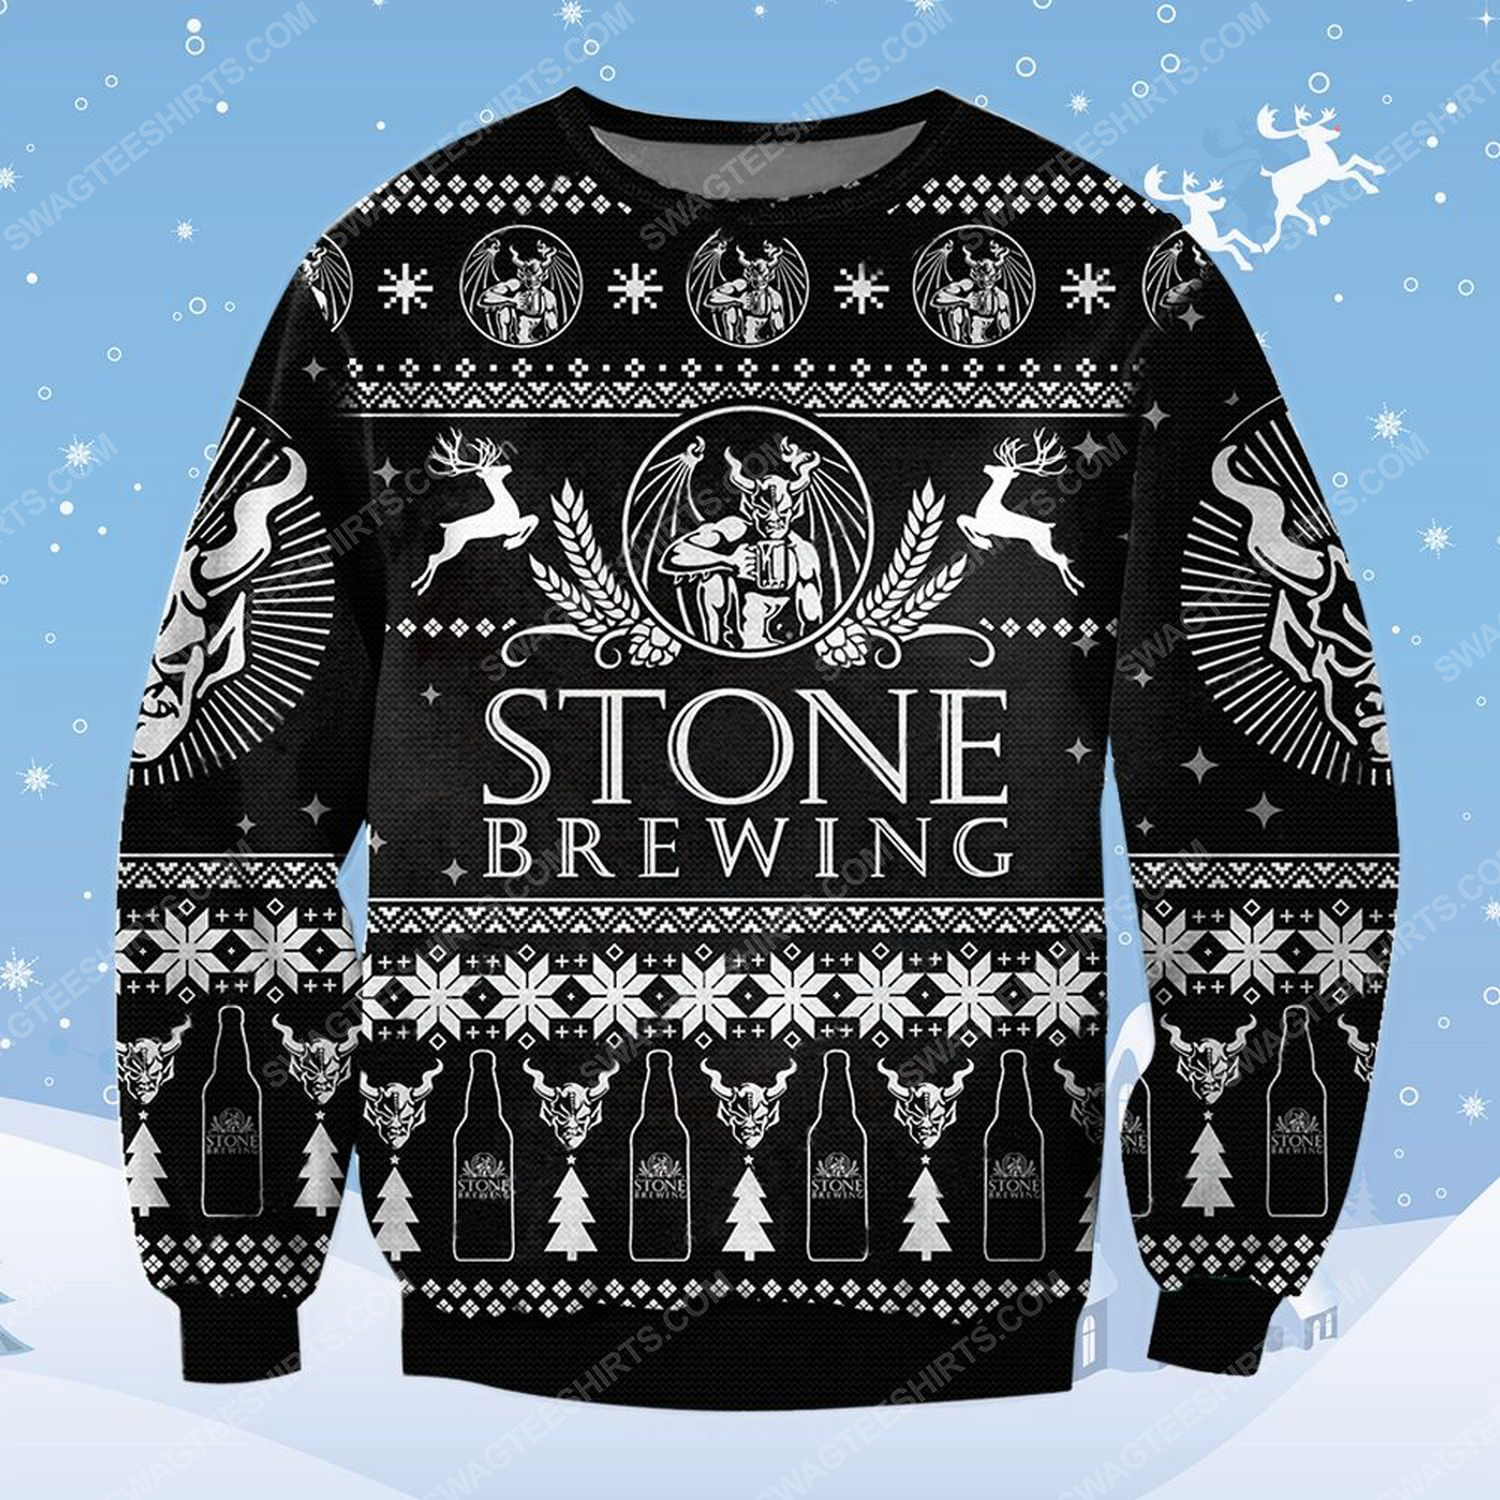 Stone brewing ugly christmas sweater